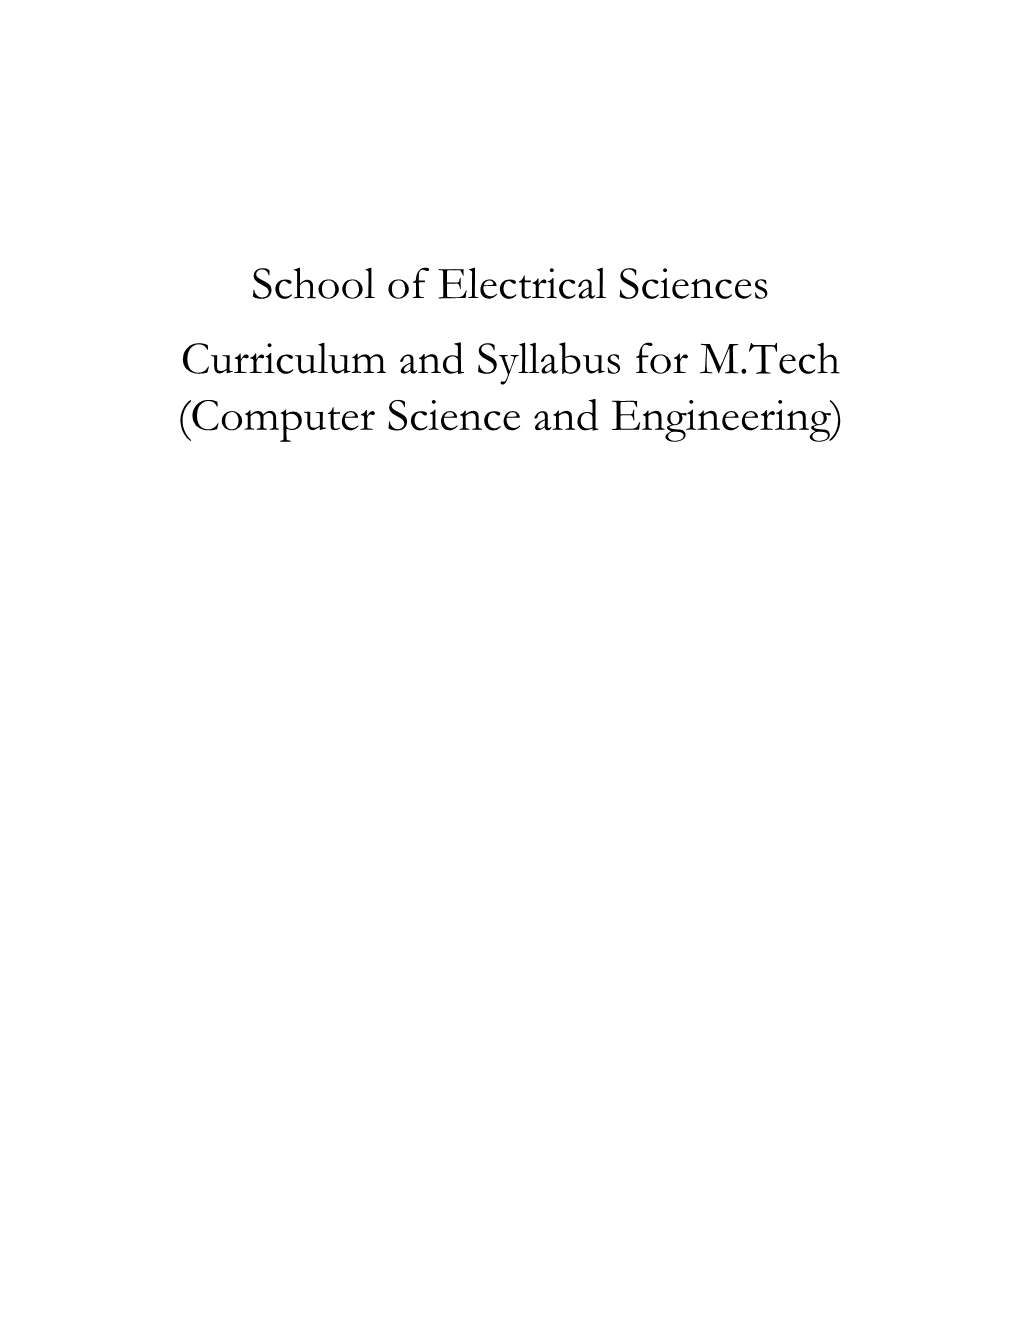 School of Electrical Sciences Curriculum and Syllabus for M.Tech (Computer Science and Engineering)